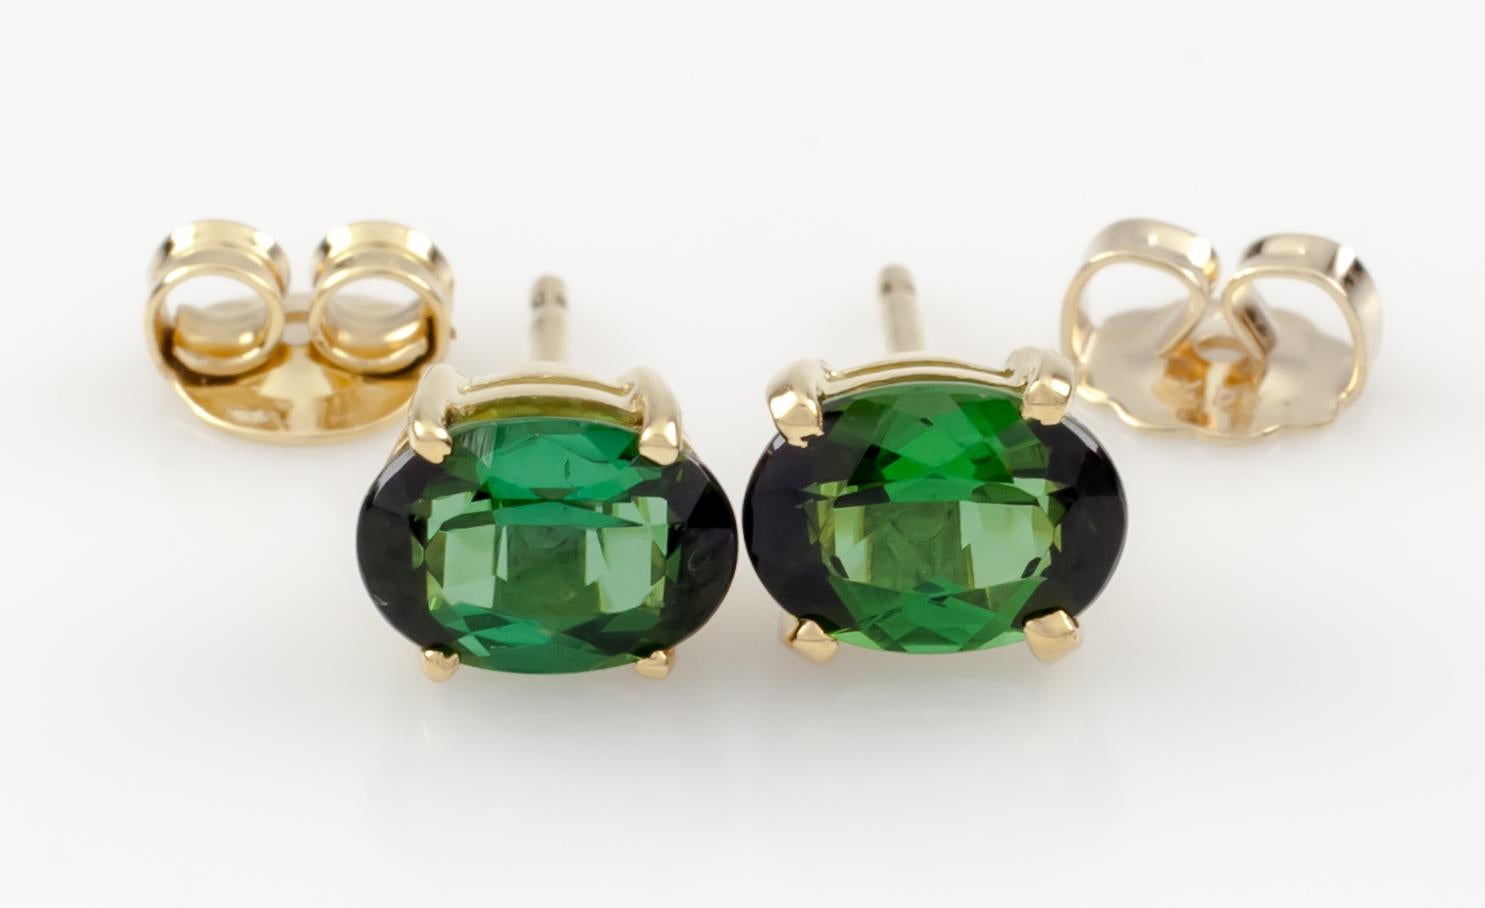 12k Yellow Gold Oval Cut Green Tourmaline Solitaire Stud Earrings In Good Condition For Sale In Sherman Oaks, CA